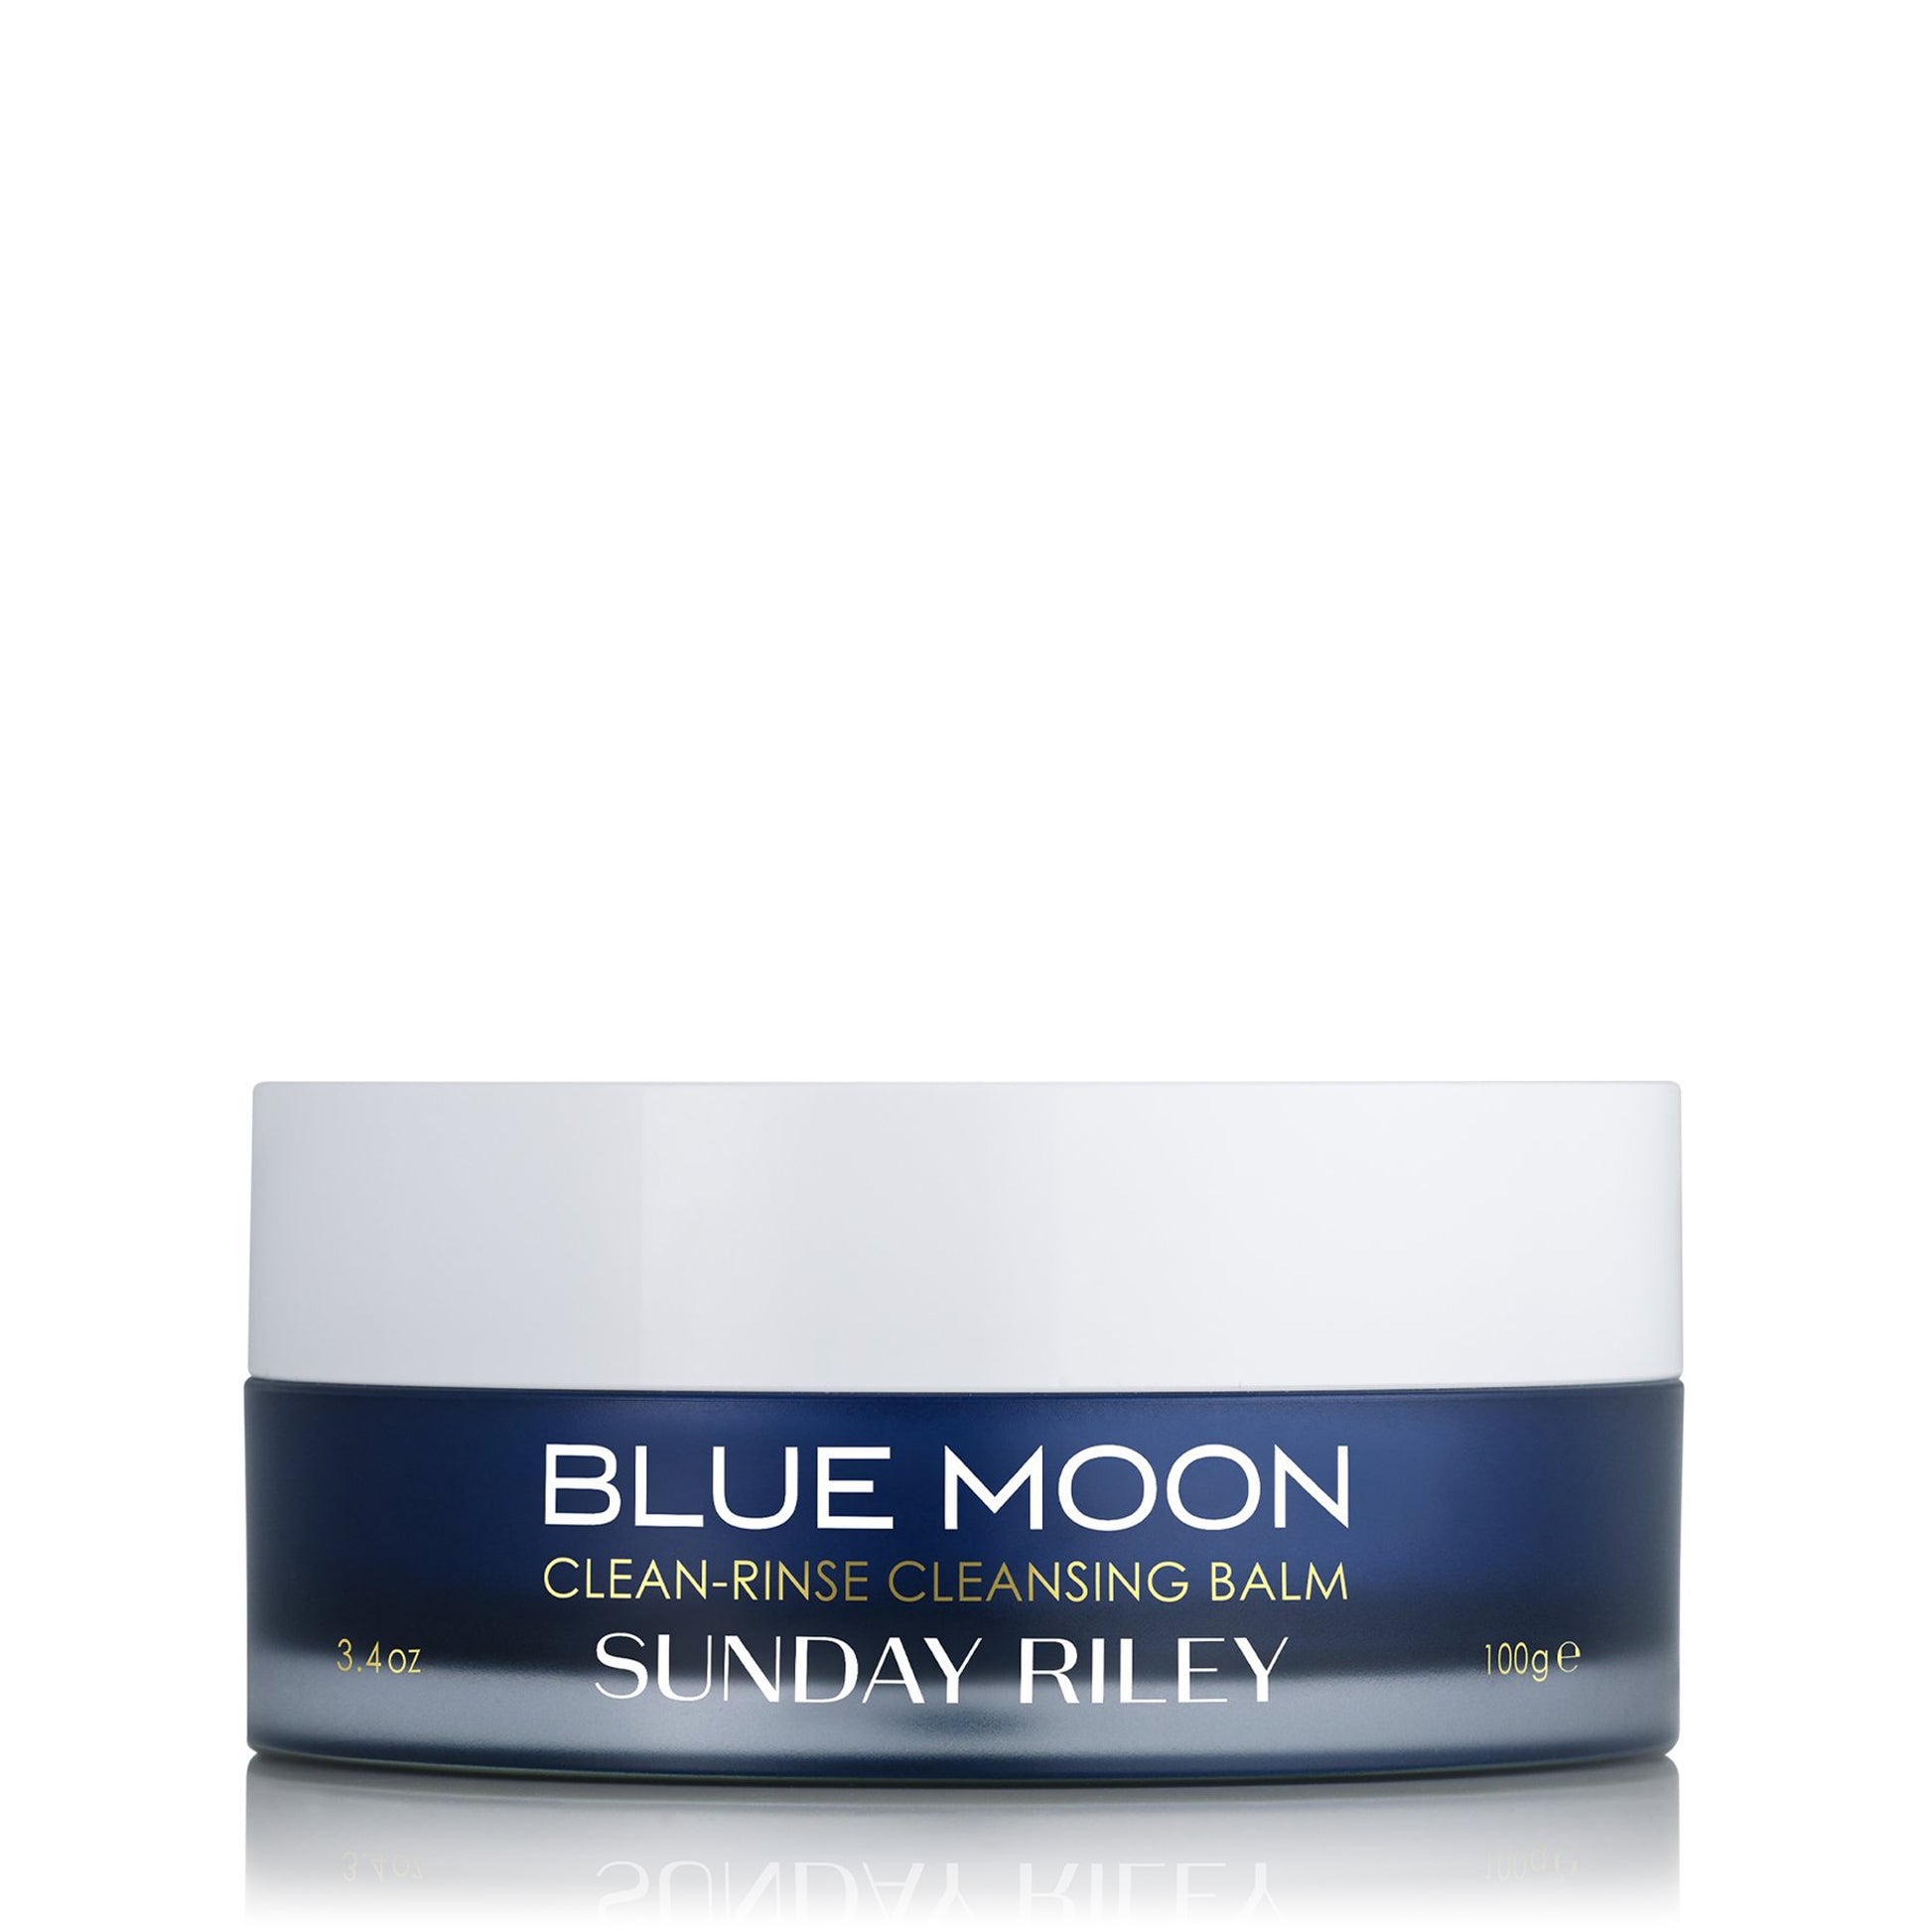 Blue Moon Cleansing Balm pack shot